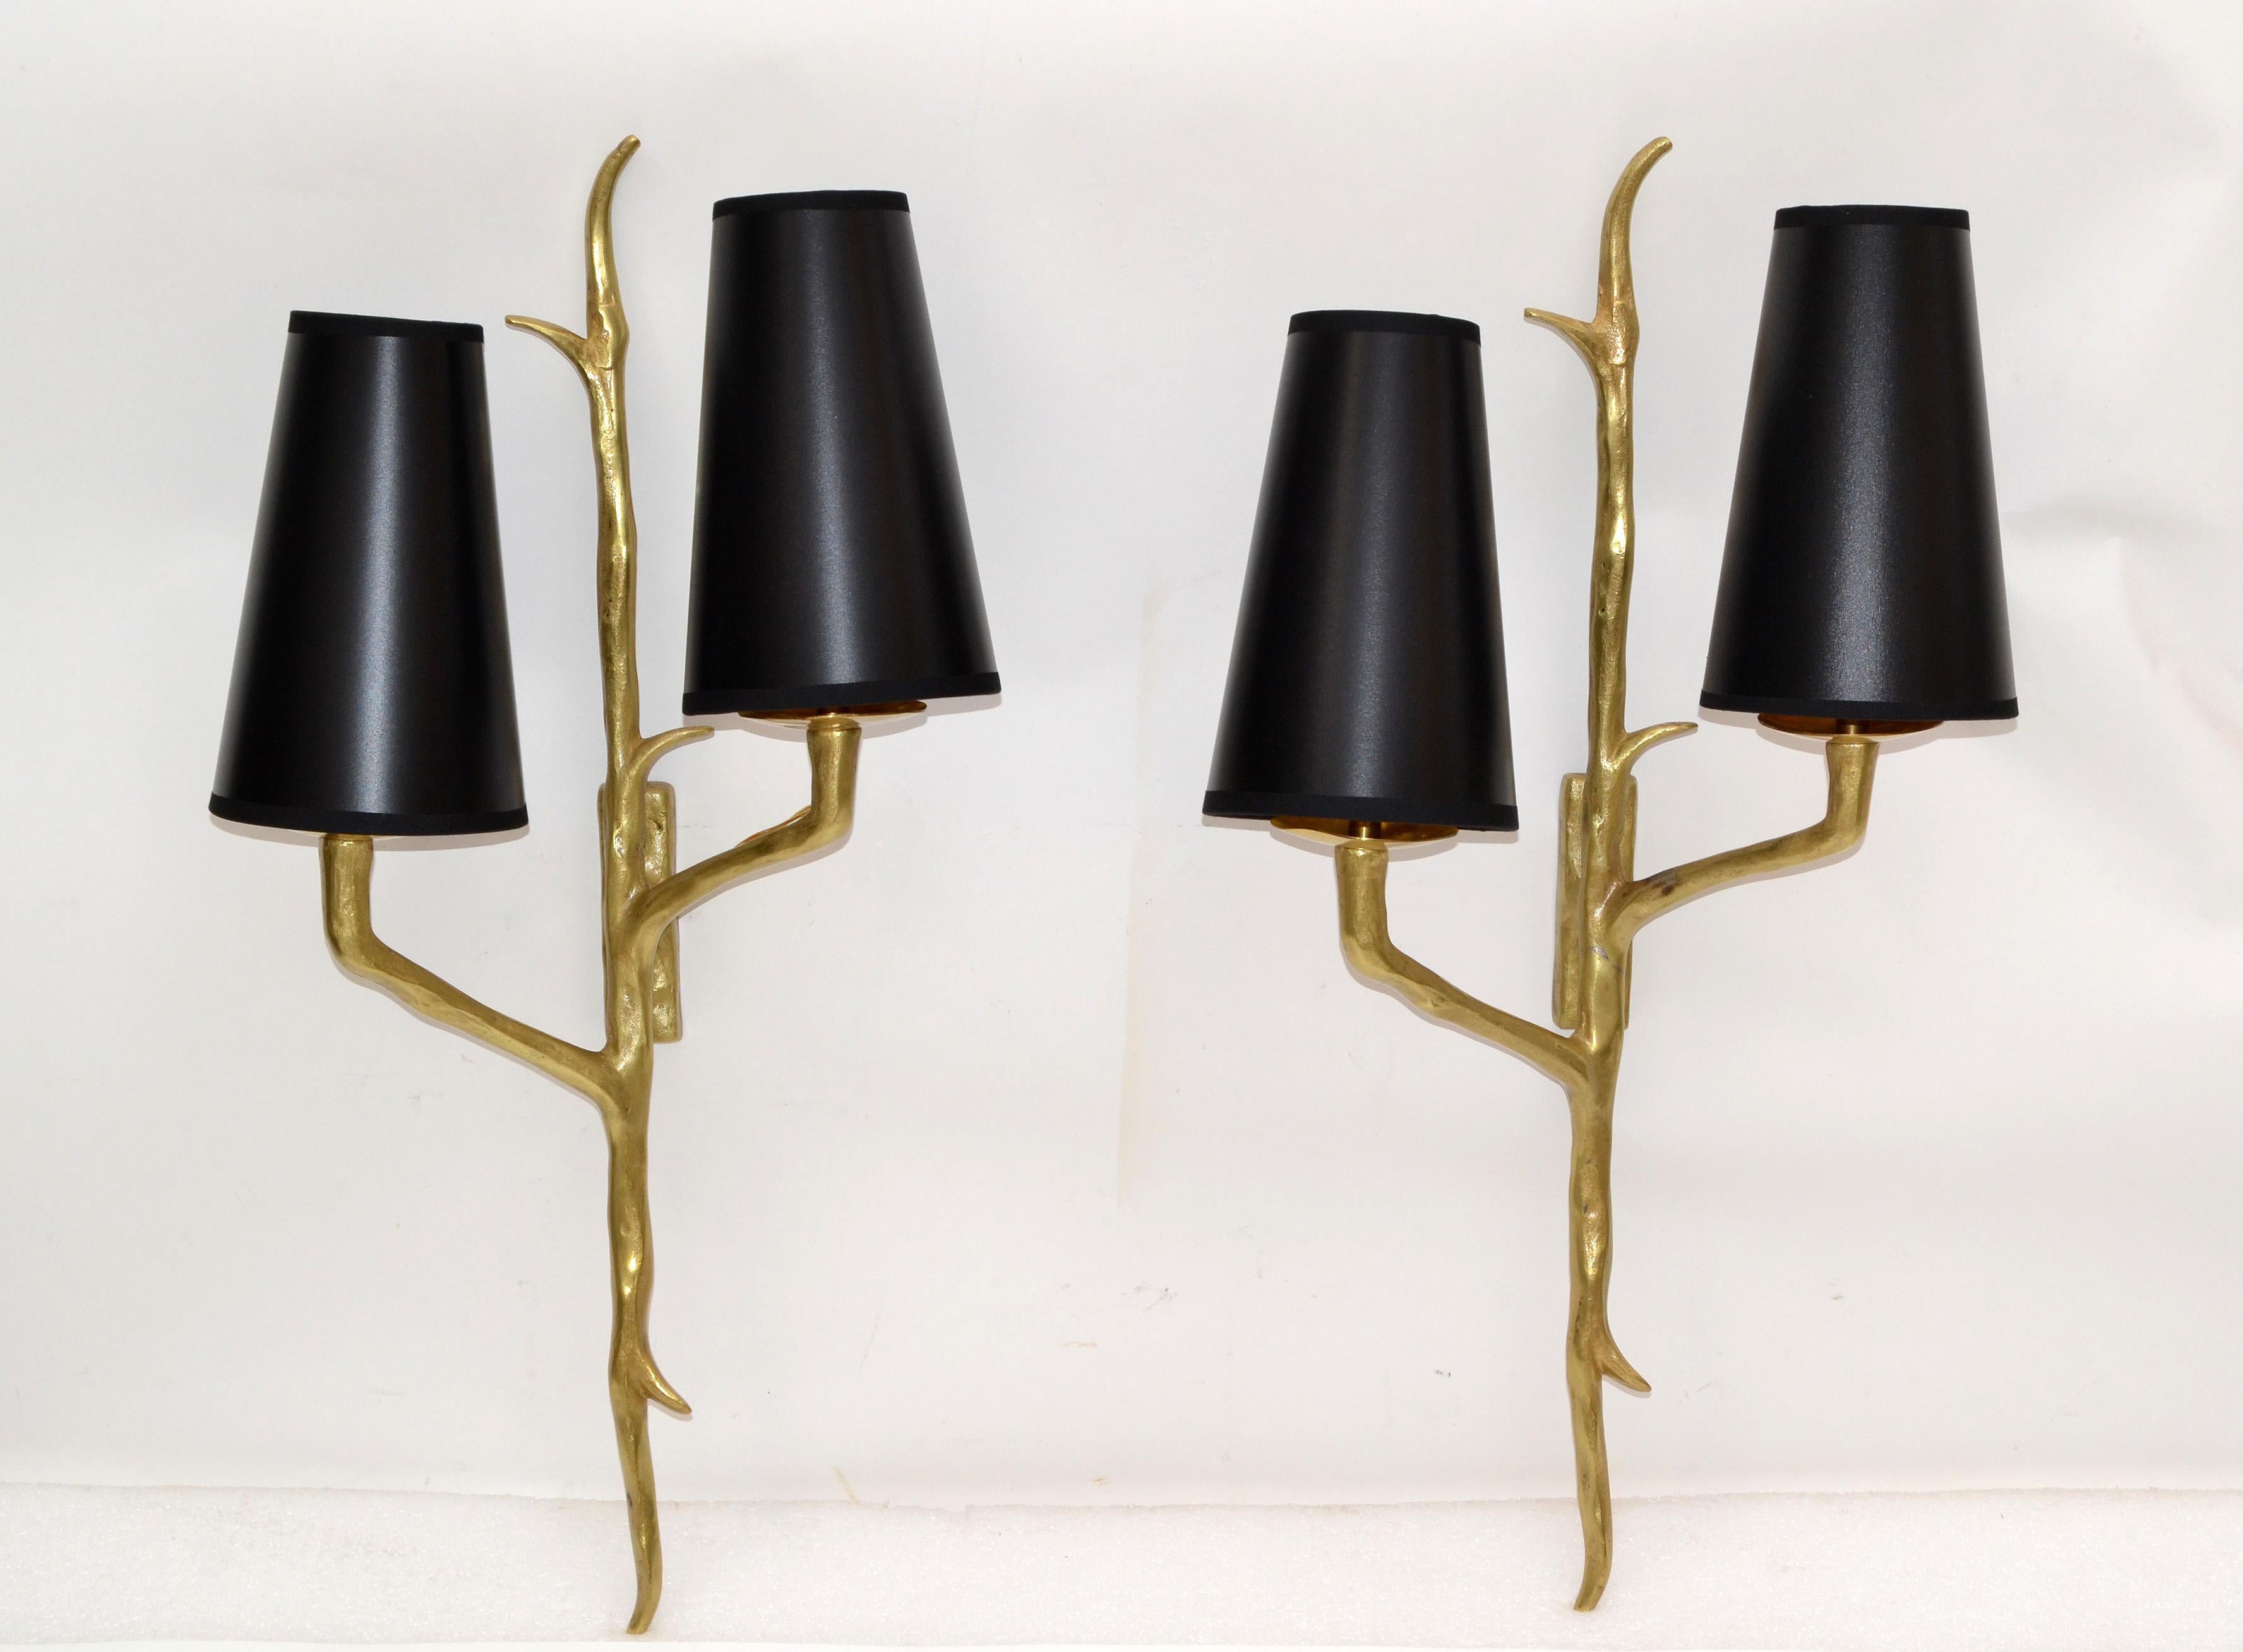 Pair of Agostini Style Sconces Bronze with Black and Gold Shades, France, 1950s For Sale 7